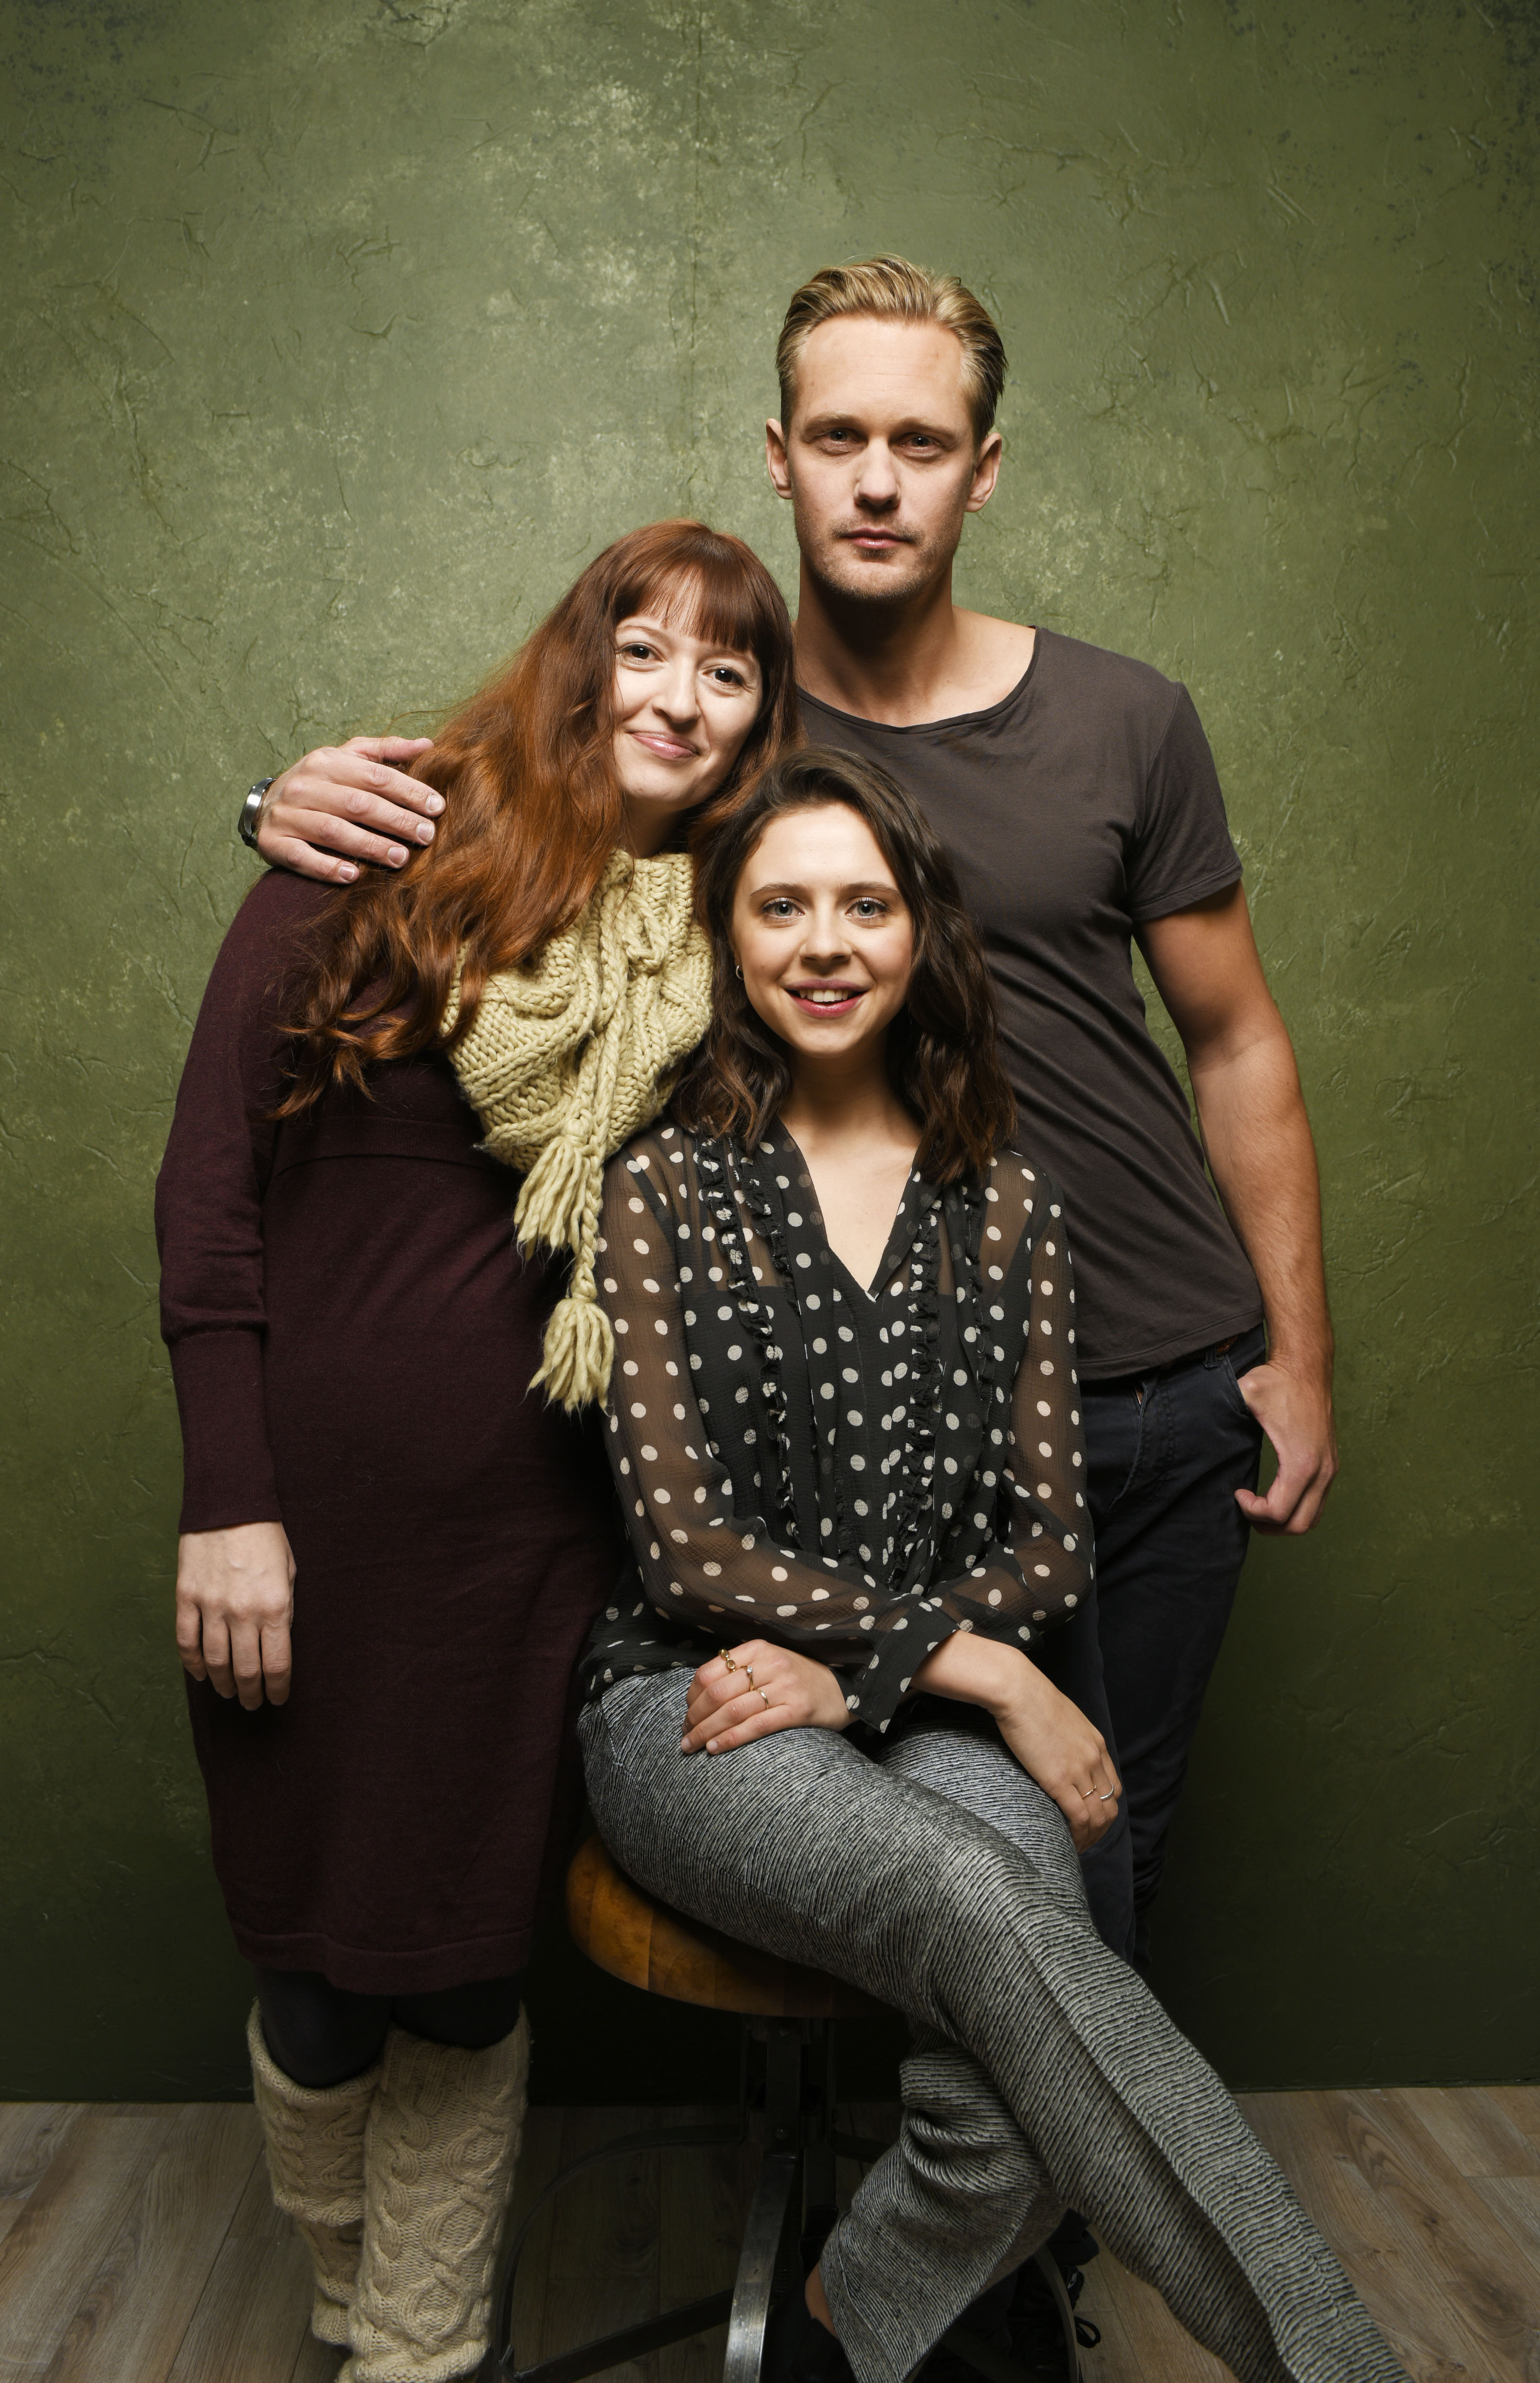 The Diary Of A Teenage Girl Director Marielle Heller Talks Being Honest About Female Sexuality